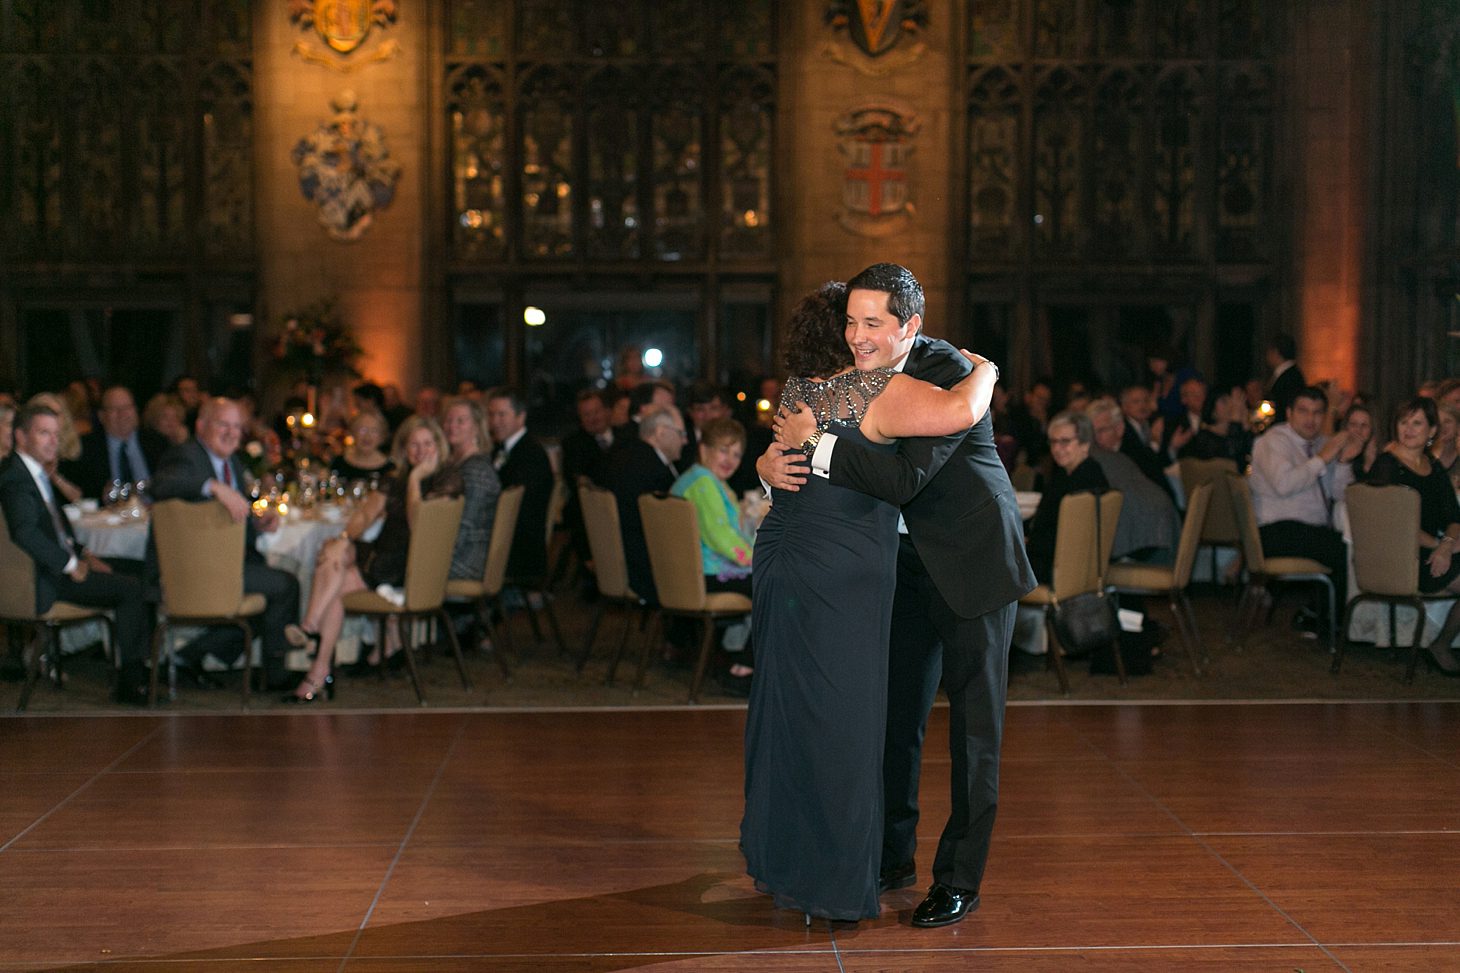 University Club of Chicago Wedding Photos by Christy Tyler Photography_0085